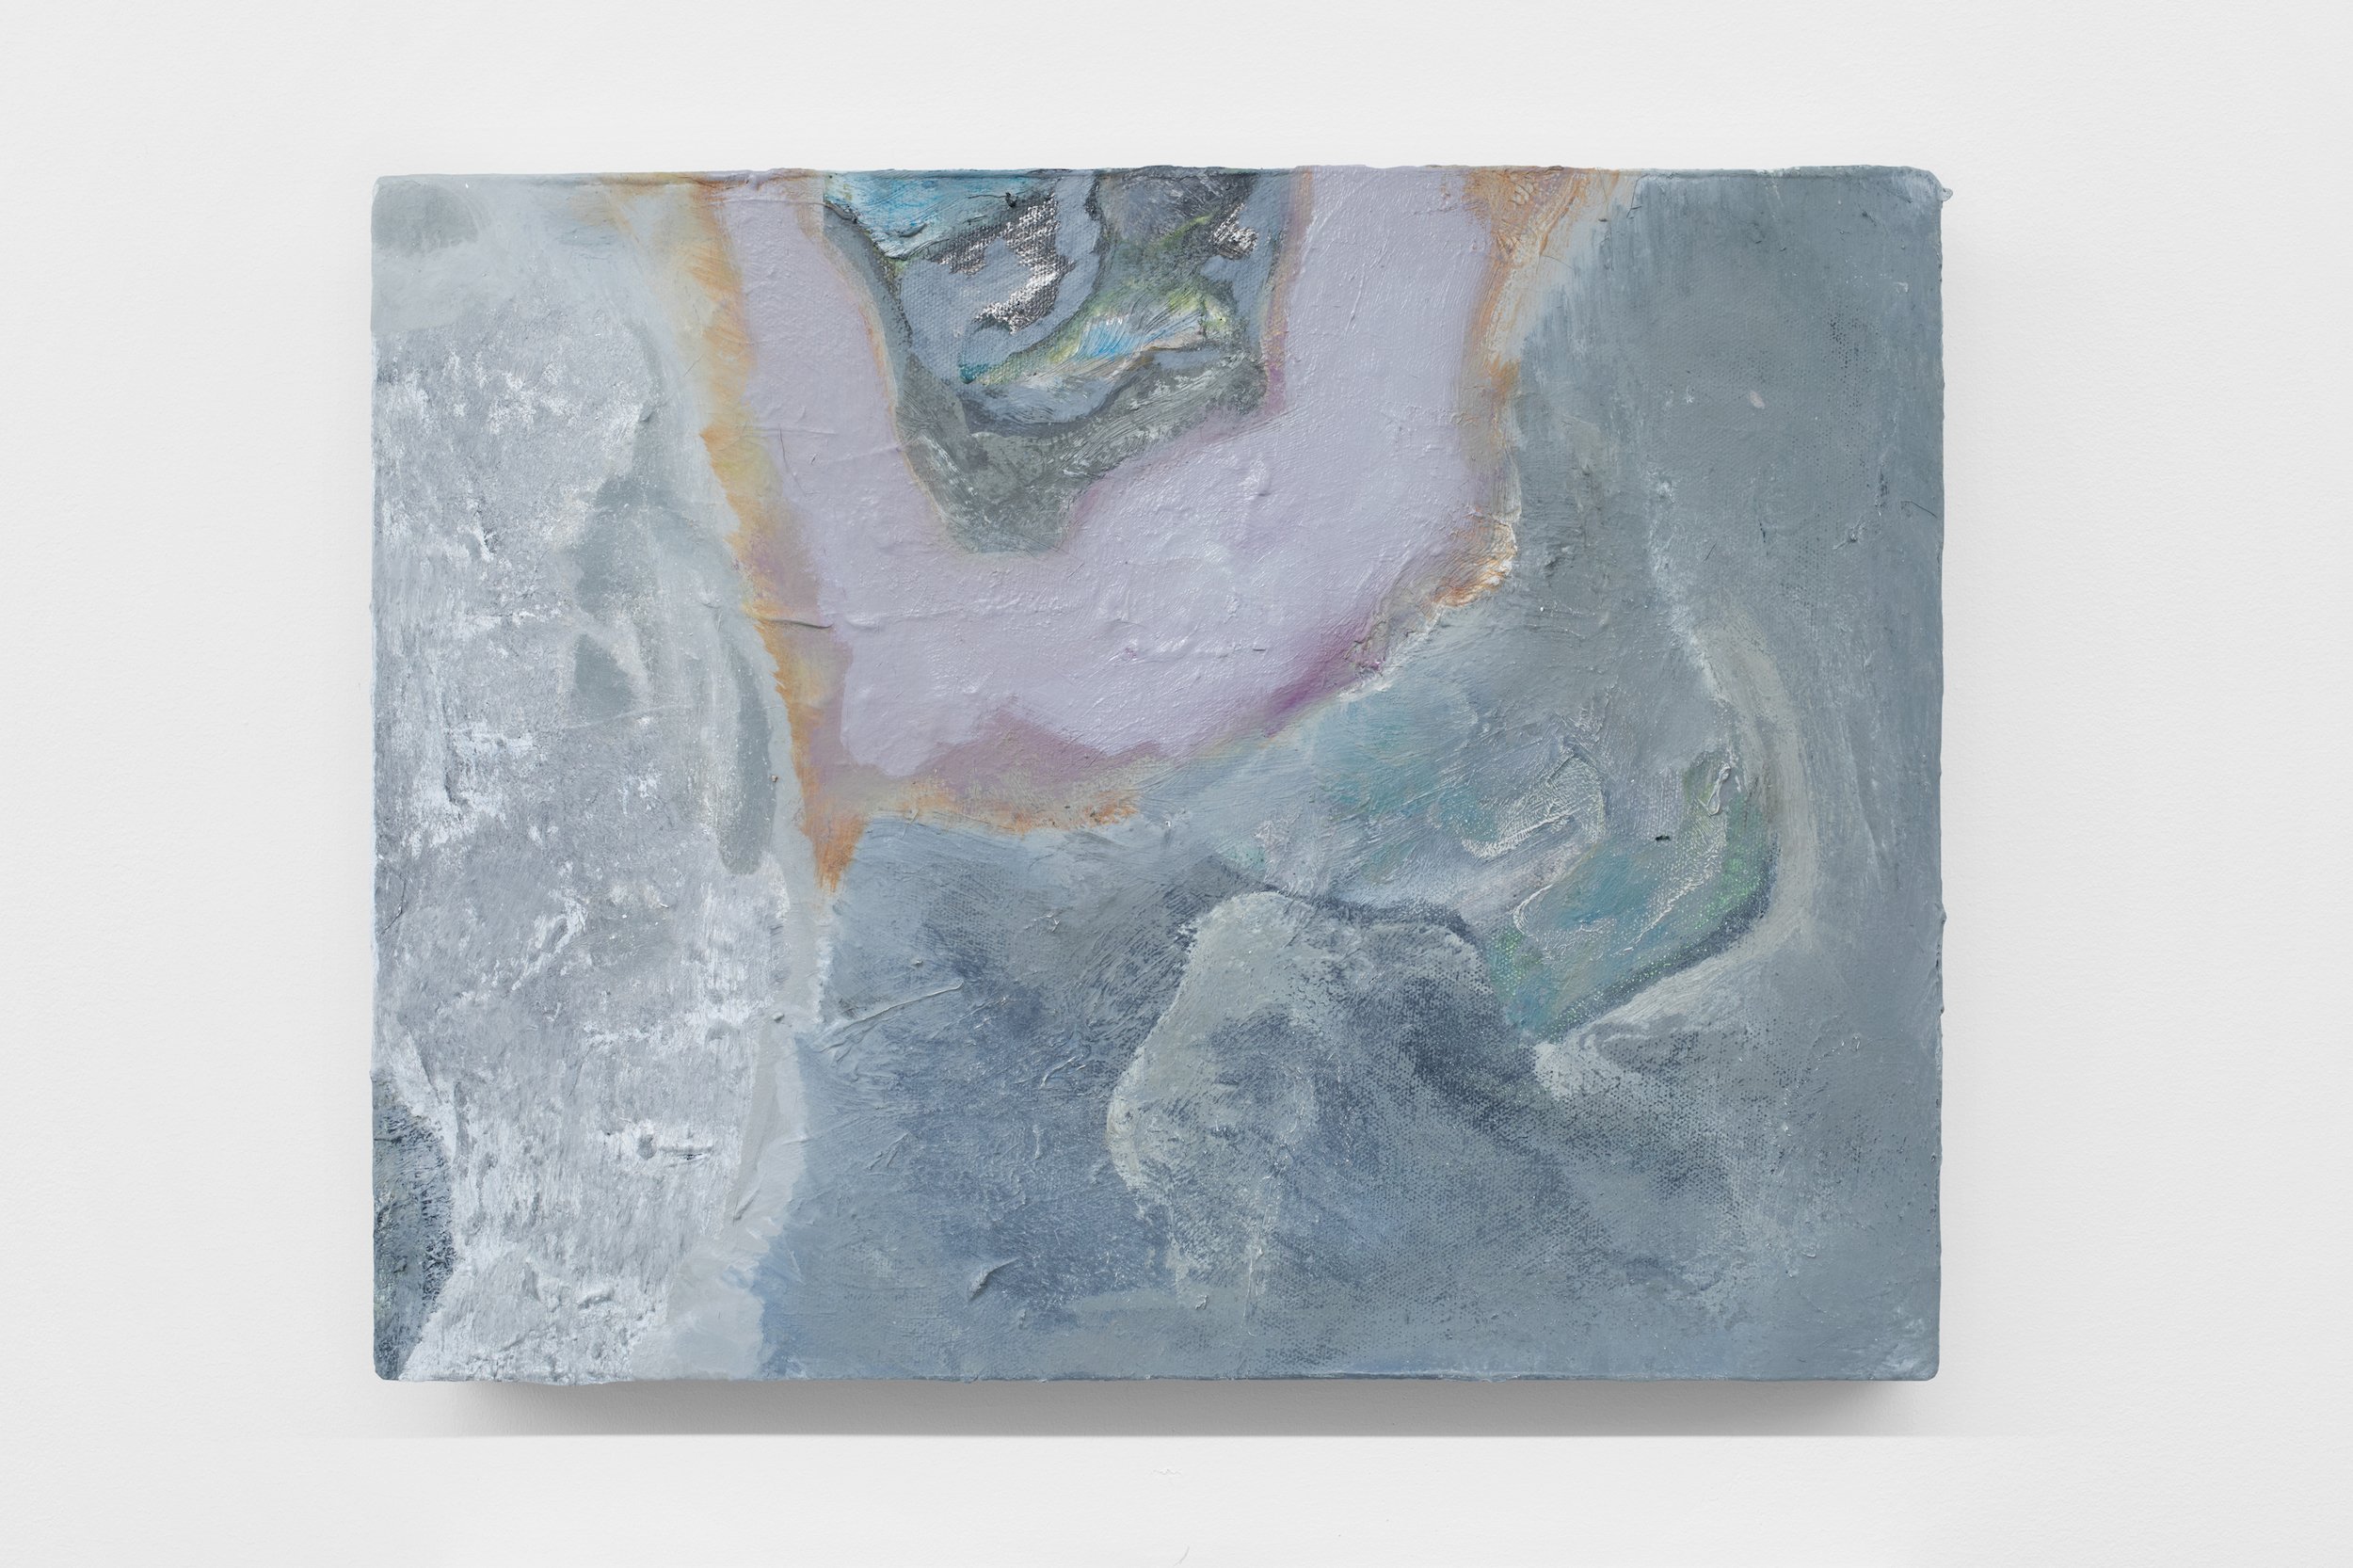  Laur P,  While the petric figure grows numb and the pool dries , 2024, Oil, acrylic, aluminum leaf, and oil-based adhesive on canvas over panel 40.6 x 30.5 cm (16 x 12 ") 